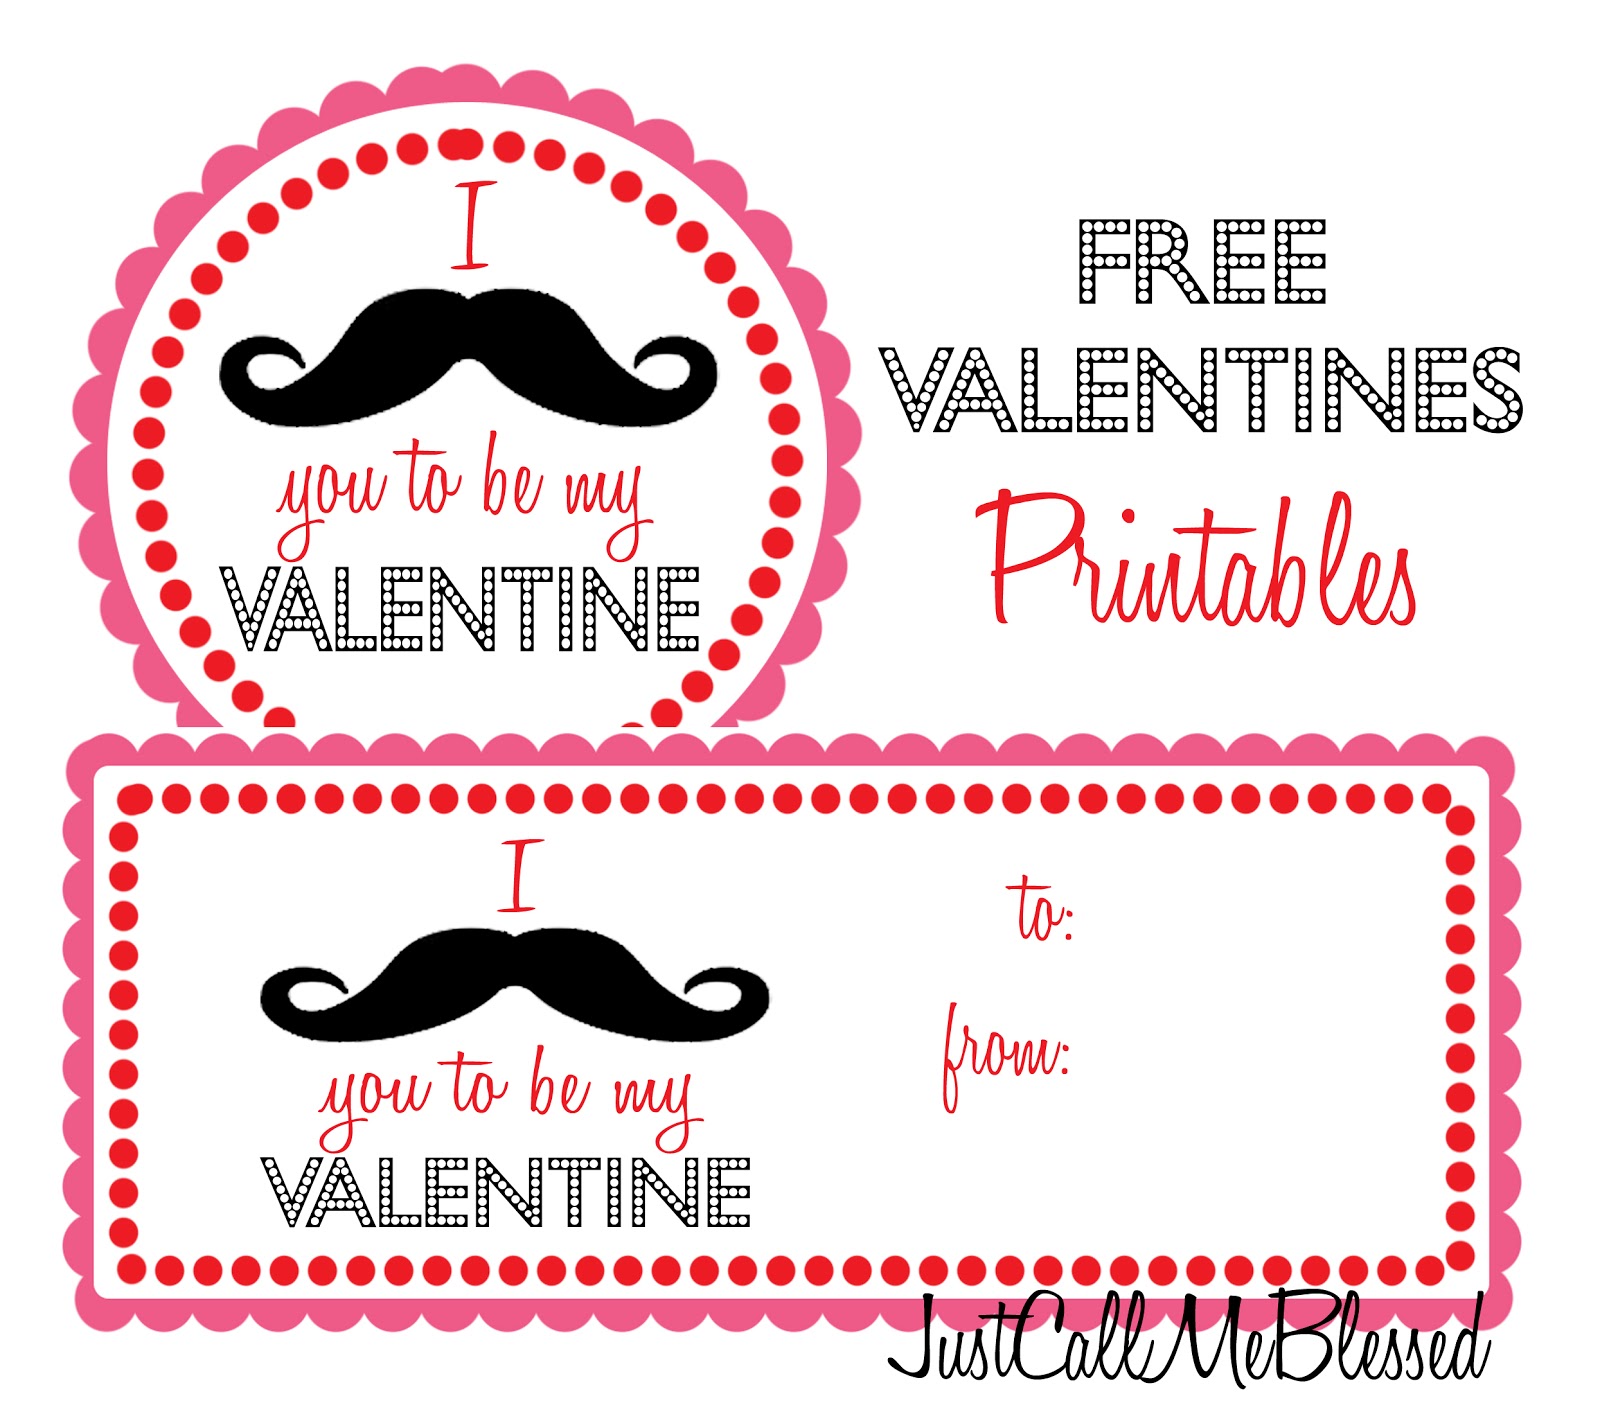 justcallmeblessed-valentines-day-free-printable